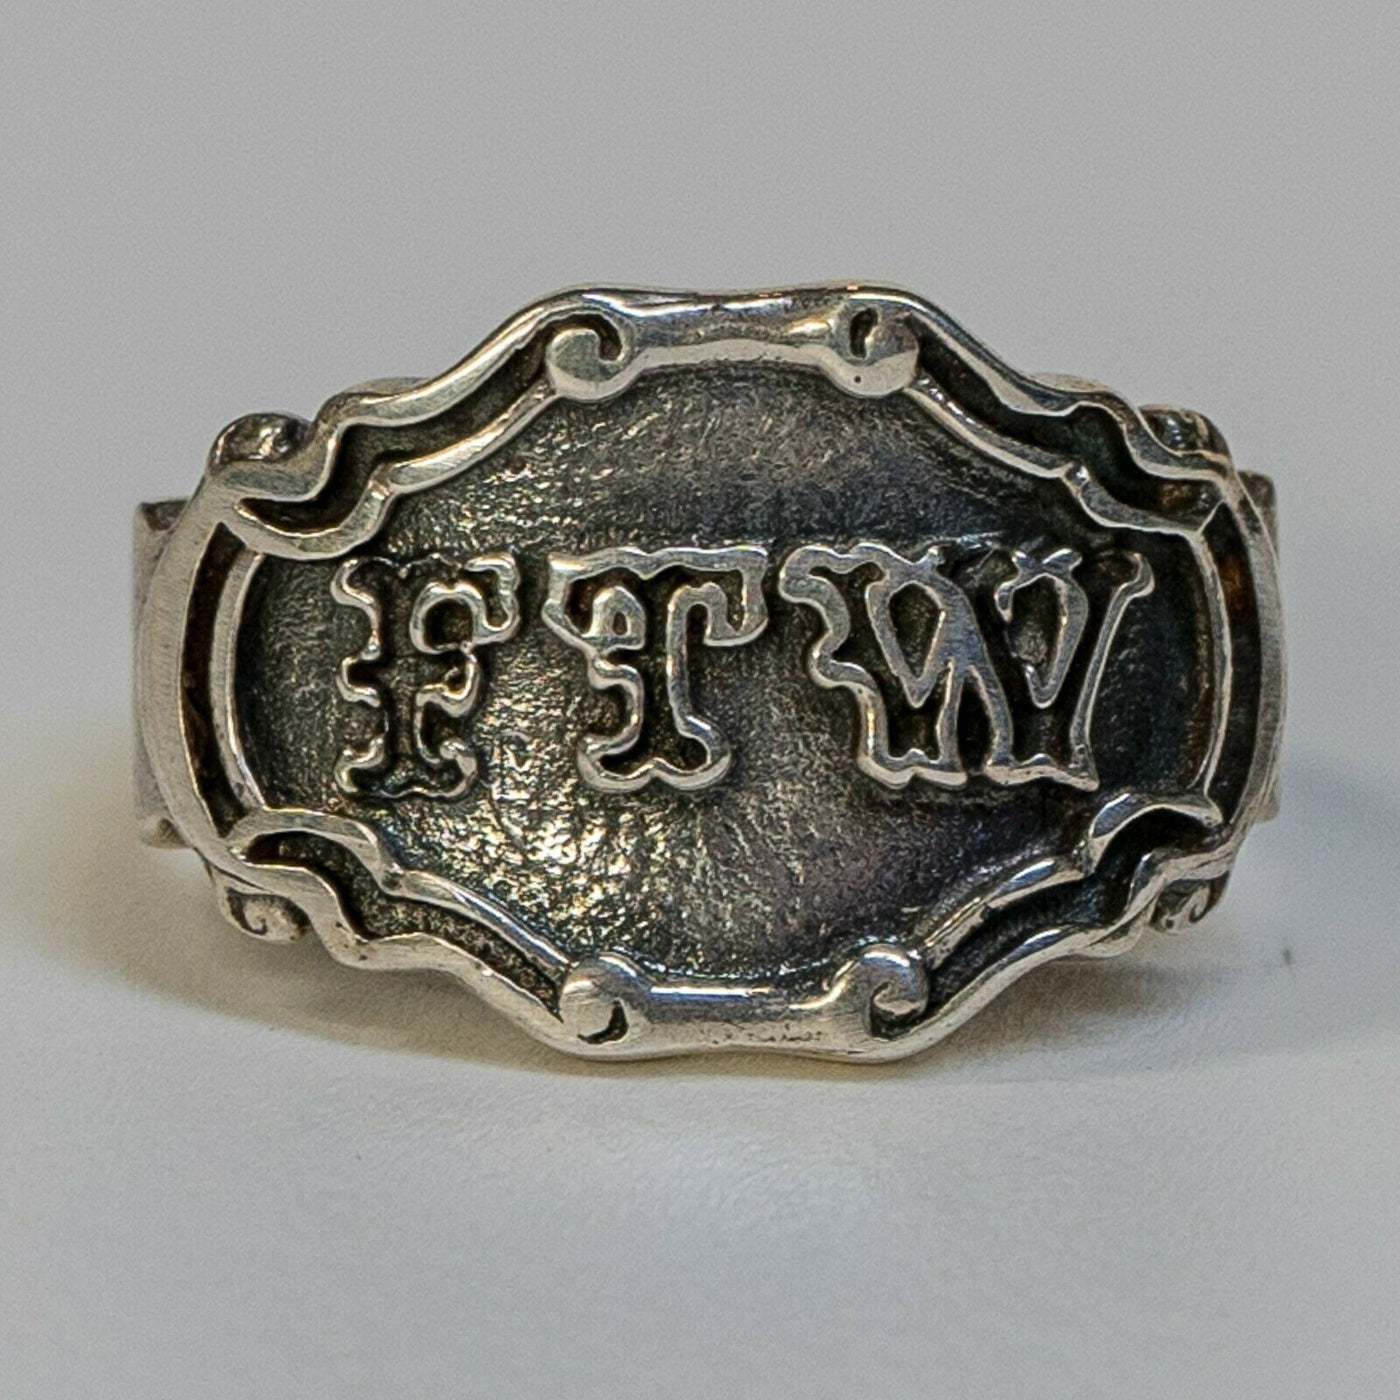 FTW F*** THE WORLD 925 silver Outlaw Biker Rock Ring Metal